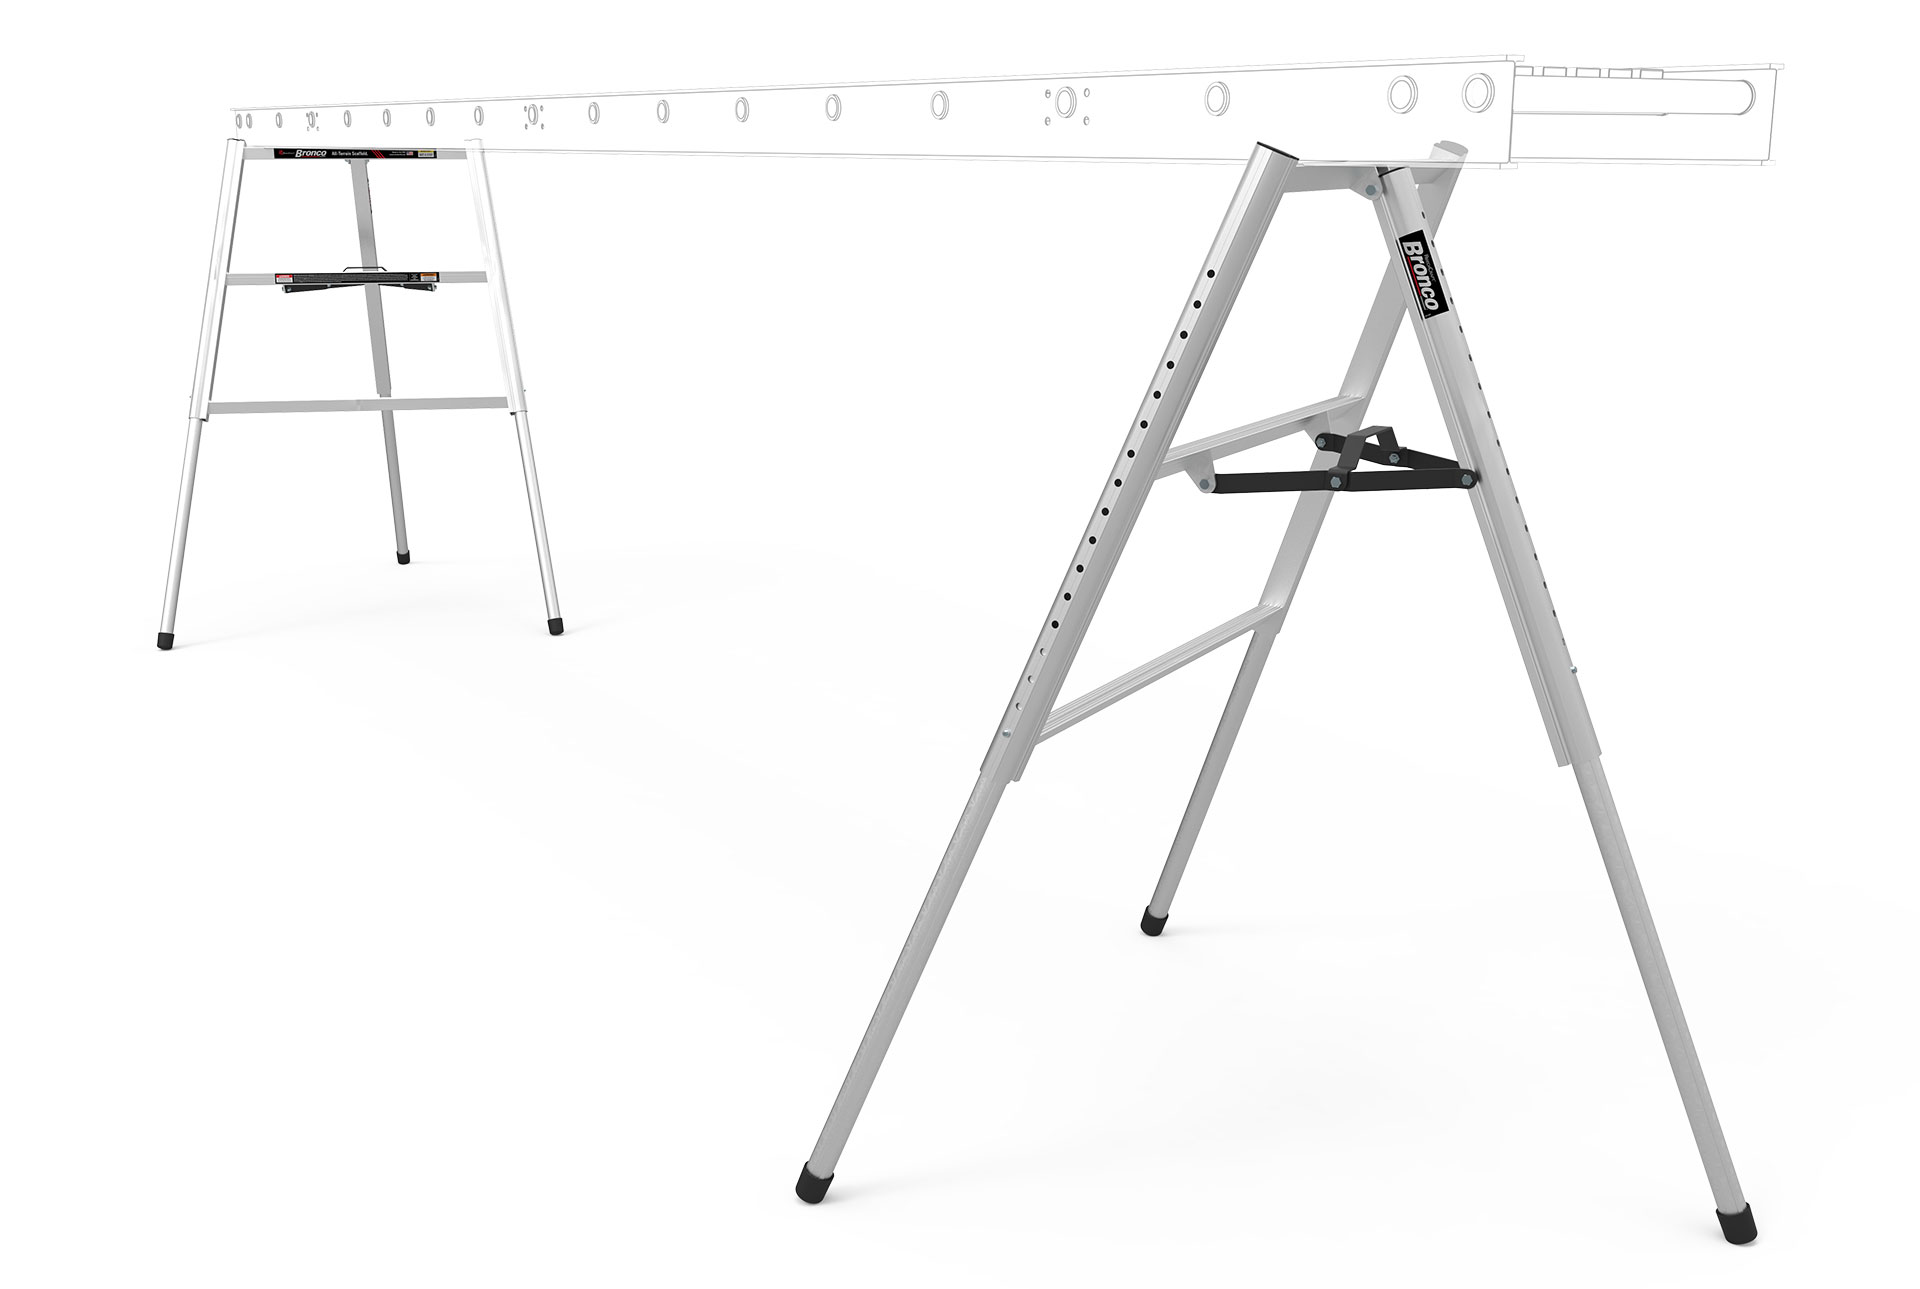 Platform Up To 24-inches Wide